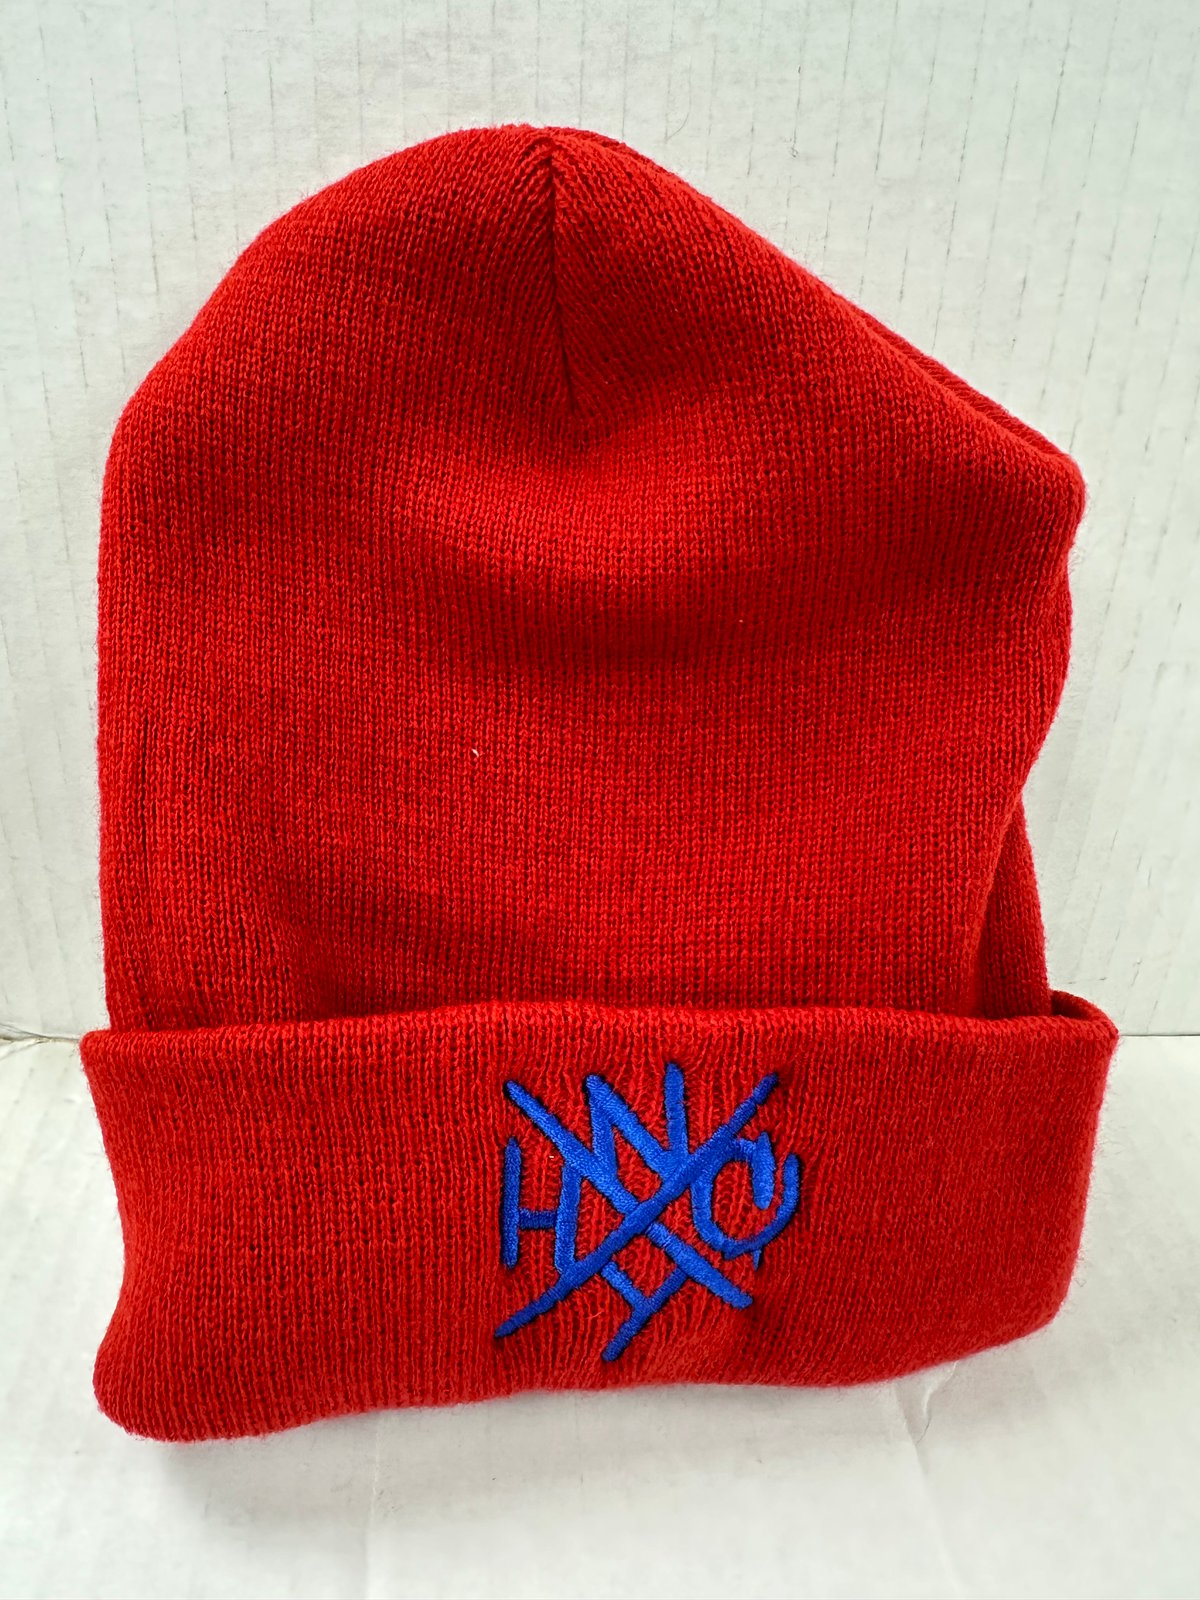 NYHC Beanie Red with Blue Logo | Generation Records